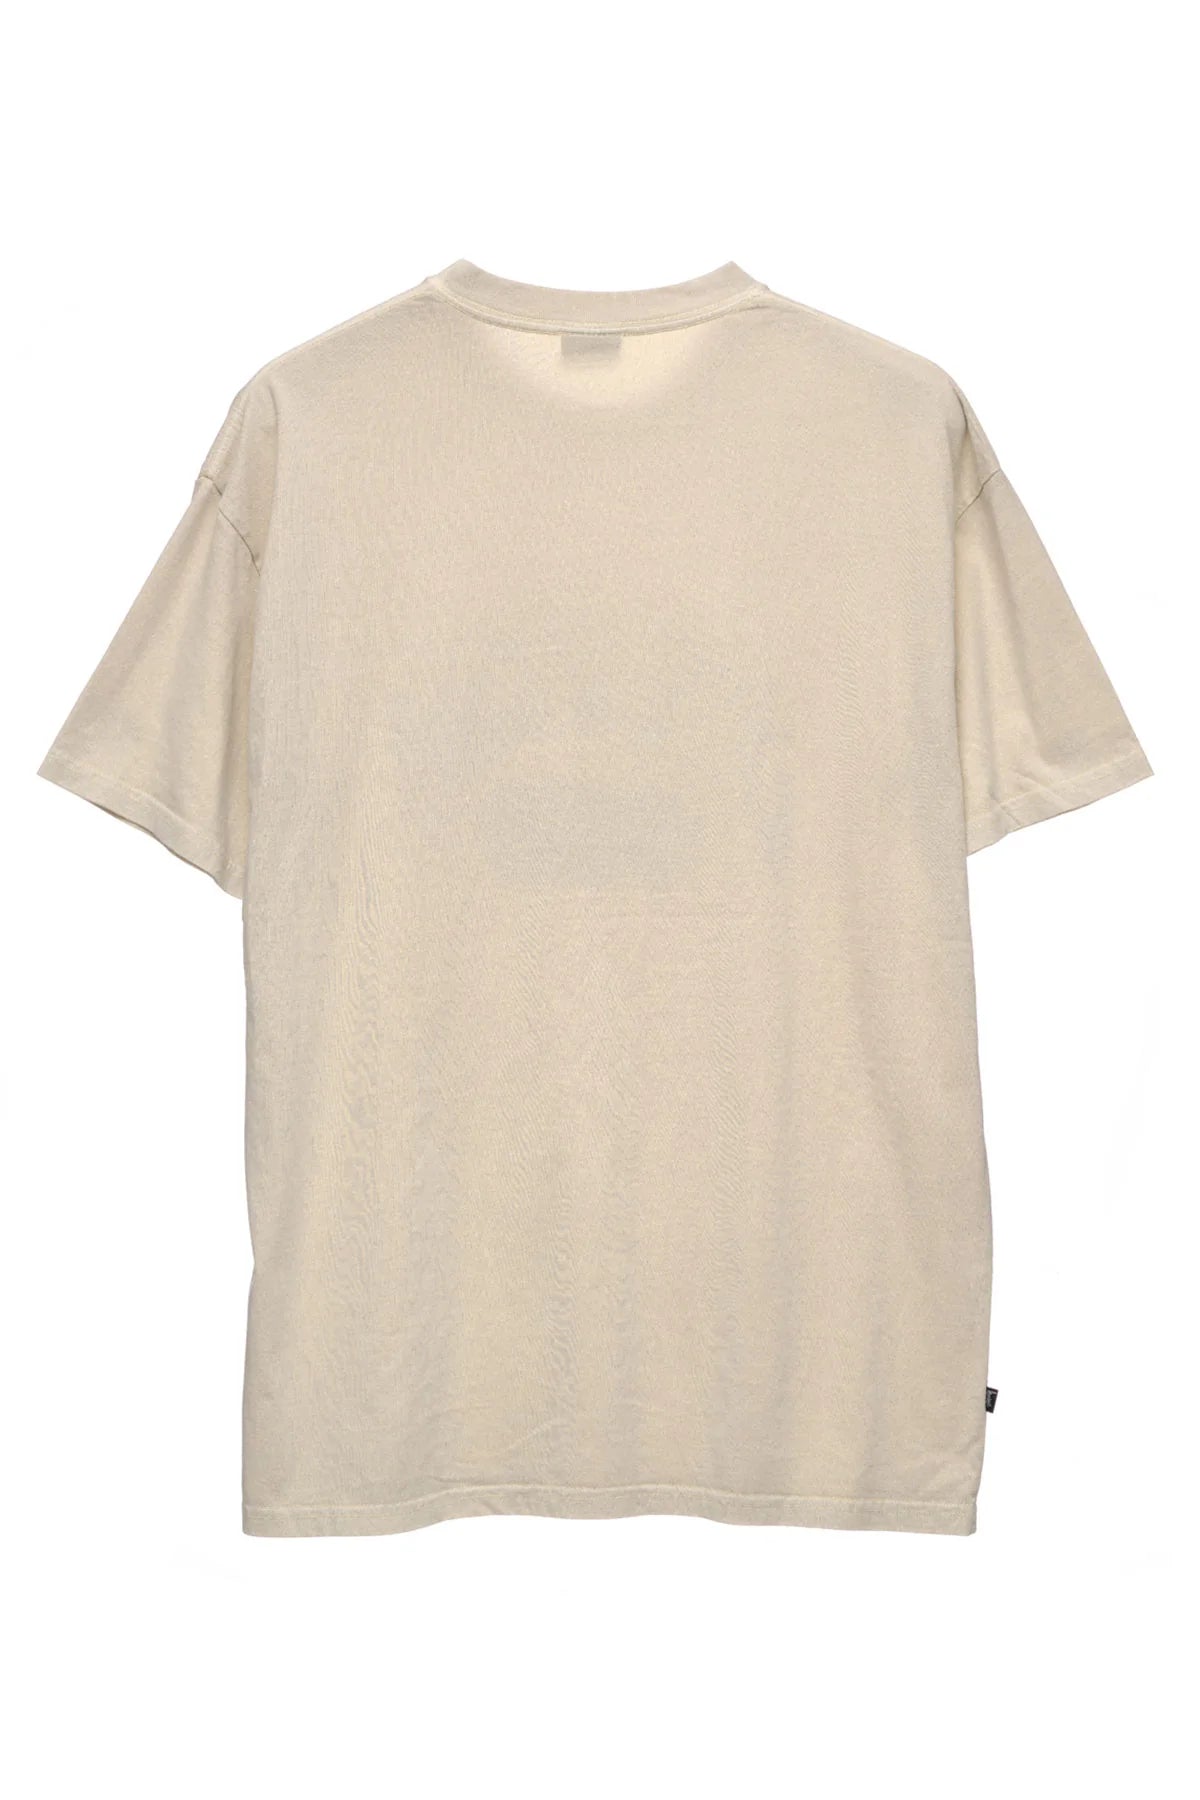 STUSSY CREW SS TEE - pigment natural